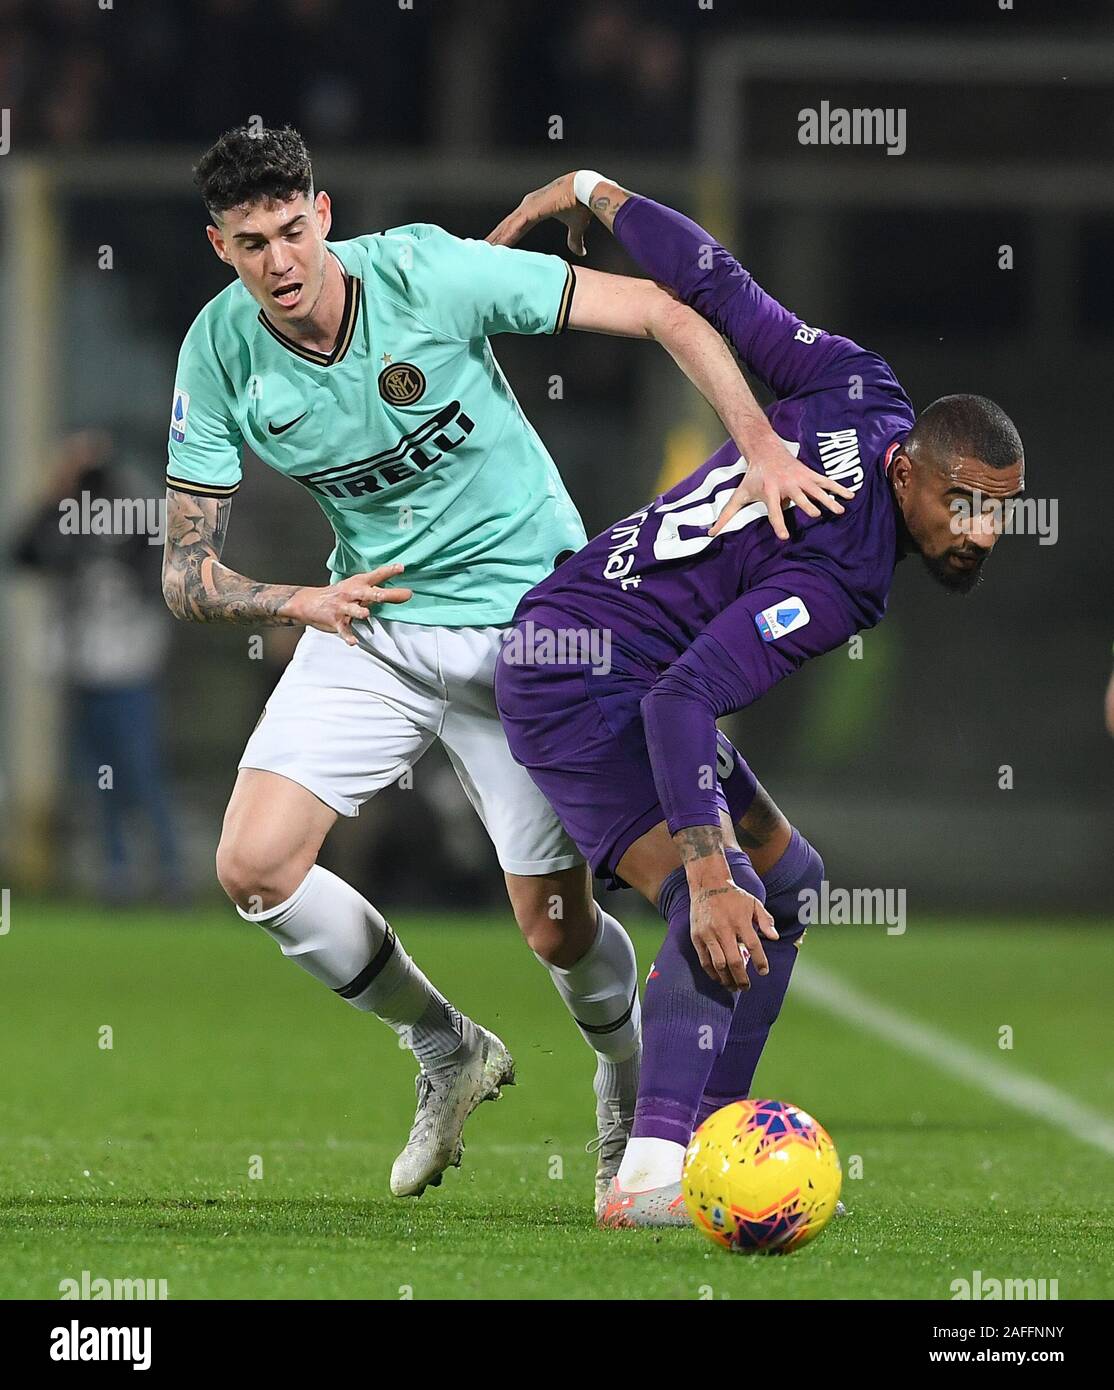 Florence, Italy. 15th Dec, 2019. FC Inter's Alessandro Bastoni (L) vies with Fiorentina's Kevin-Prince Boateng during an Italian Serie A soccer match in Florence, Italy, Dec. 15, 2019. Credit: Alberto Lingria/Xinhua/Alamy Live News Stock Photo